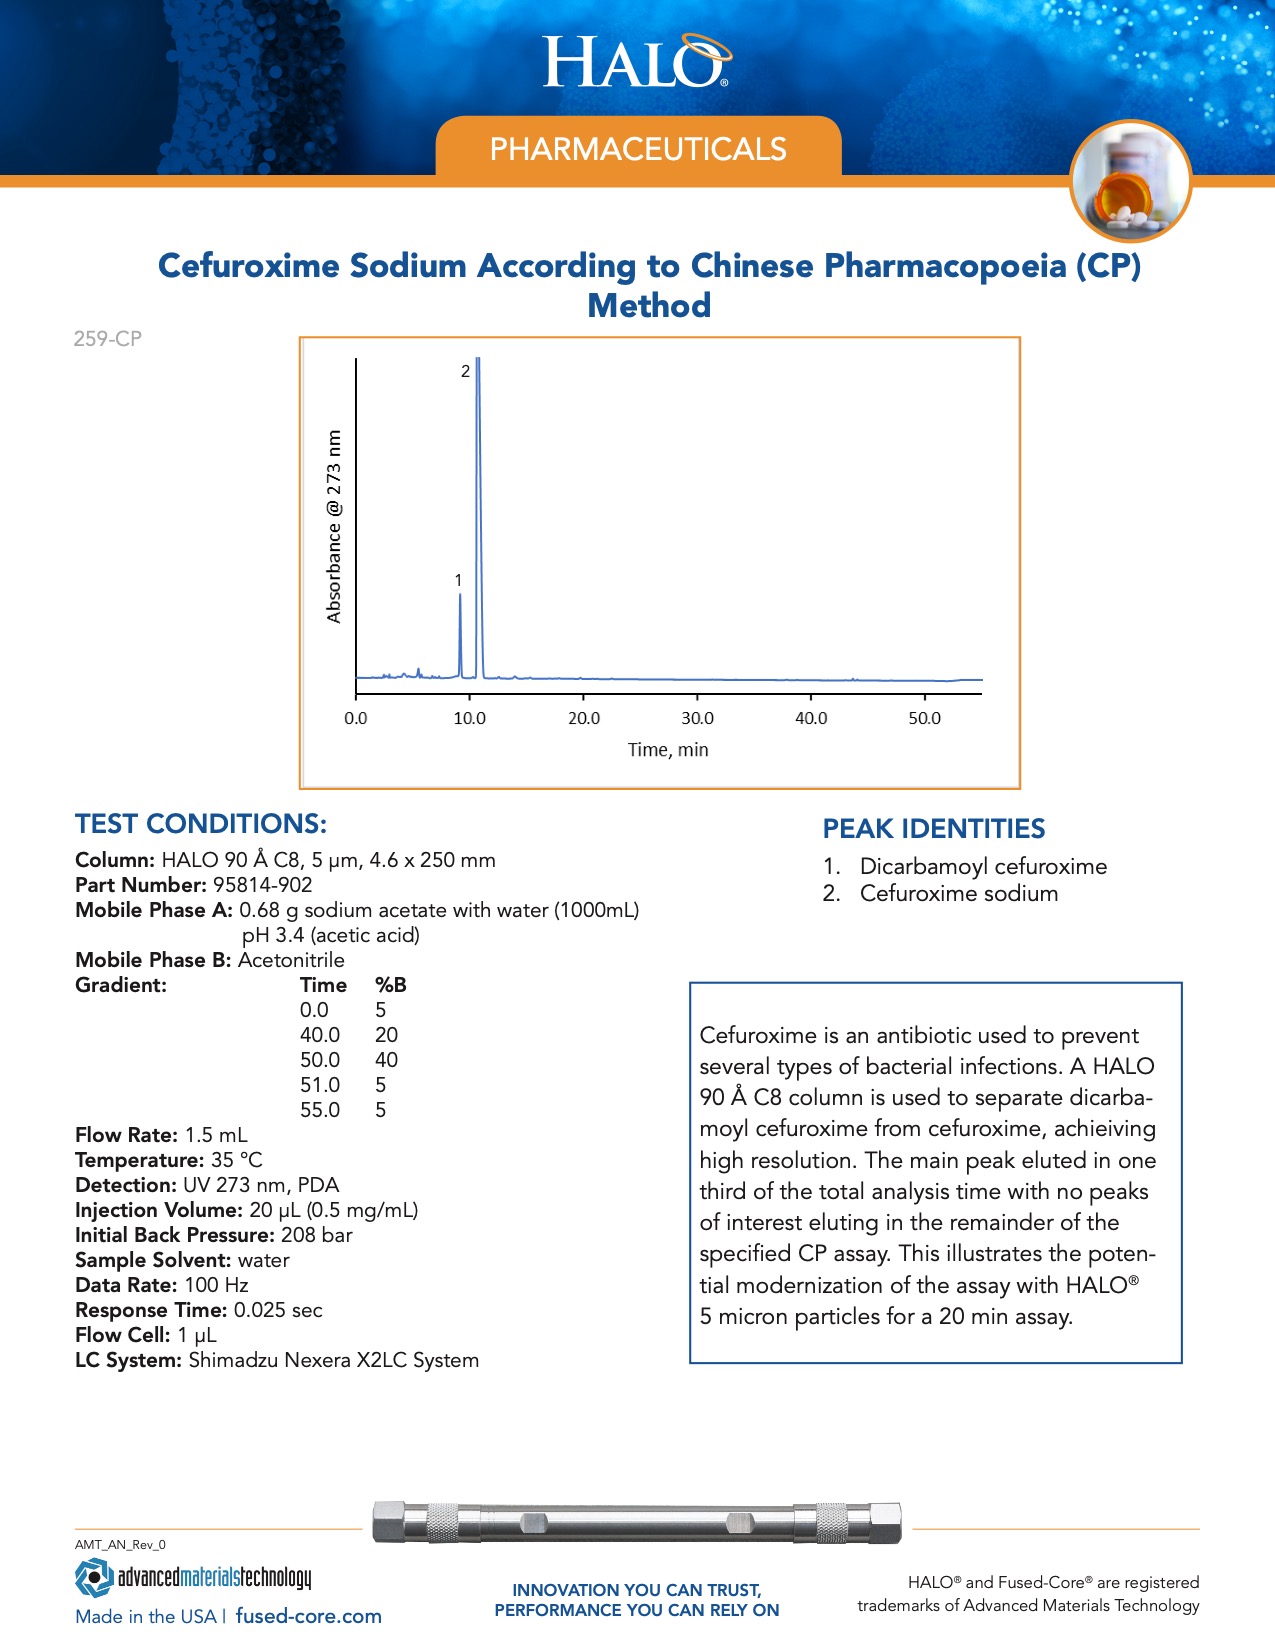 hplc for pharmaceutical scientists - cefuroxime sodium according to cp method report